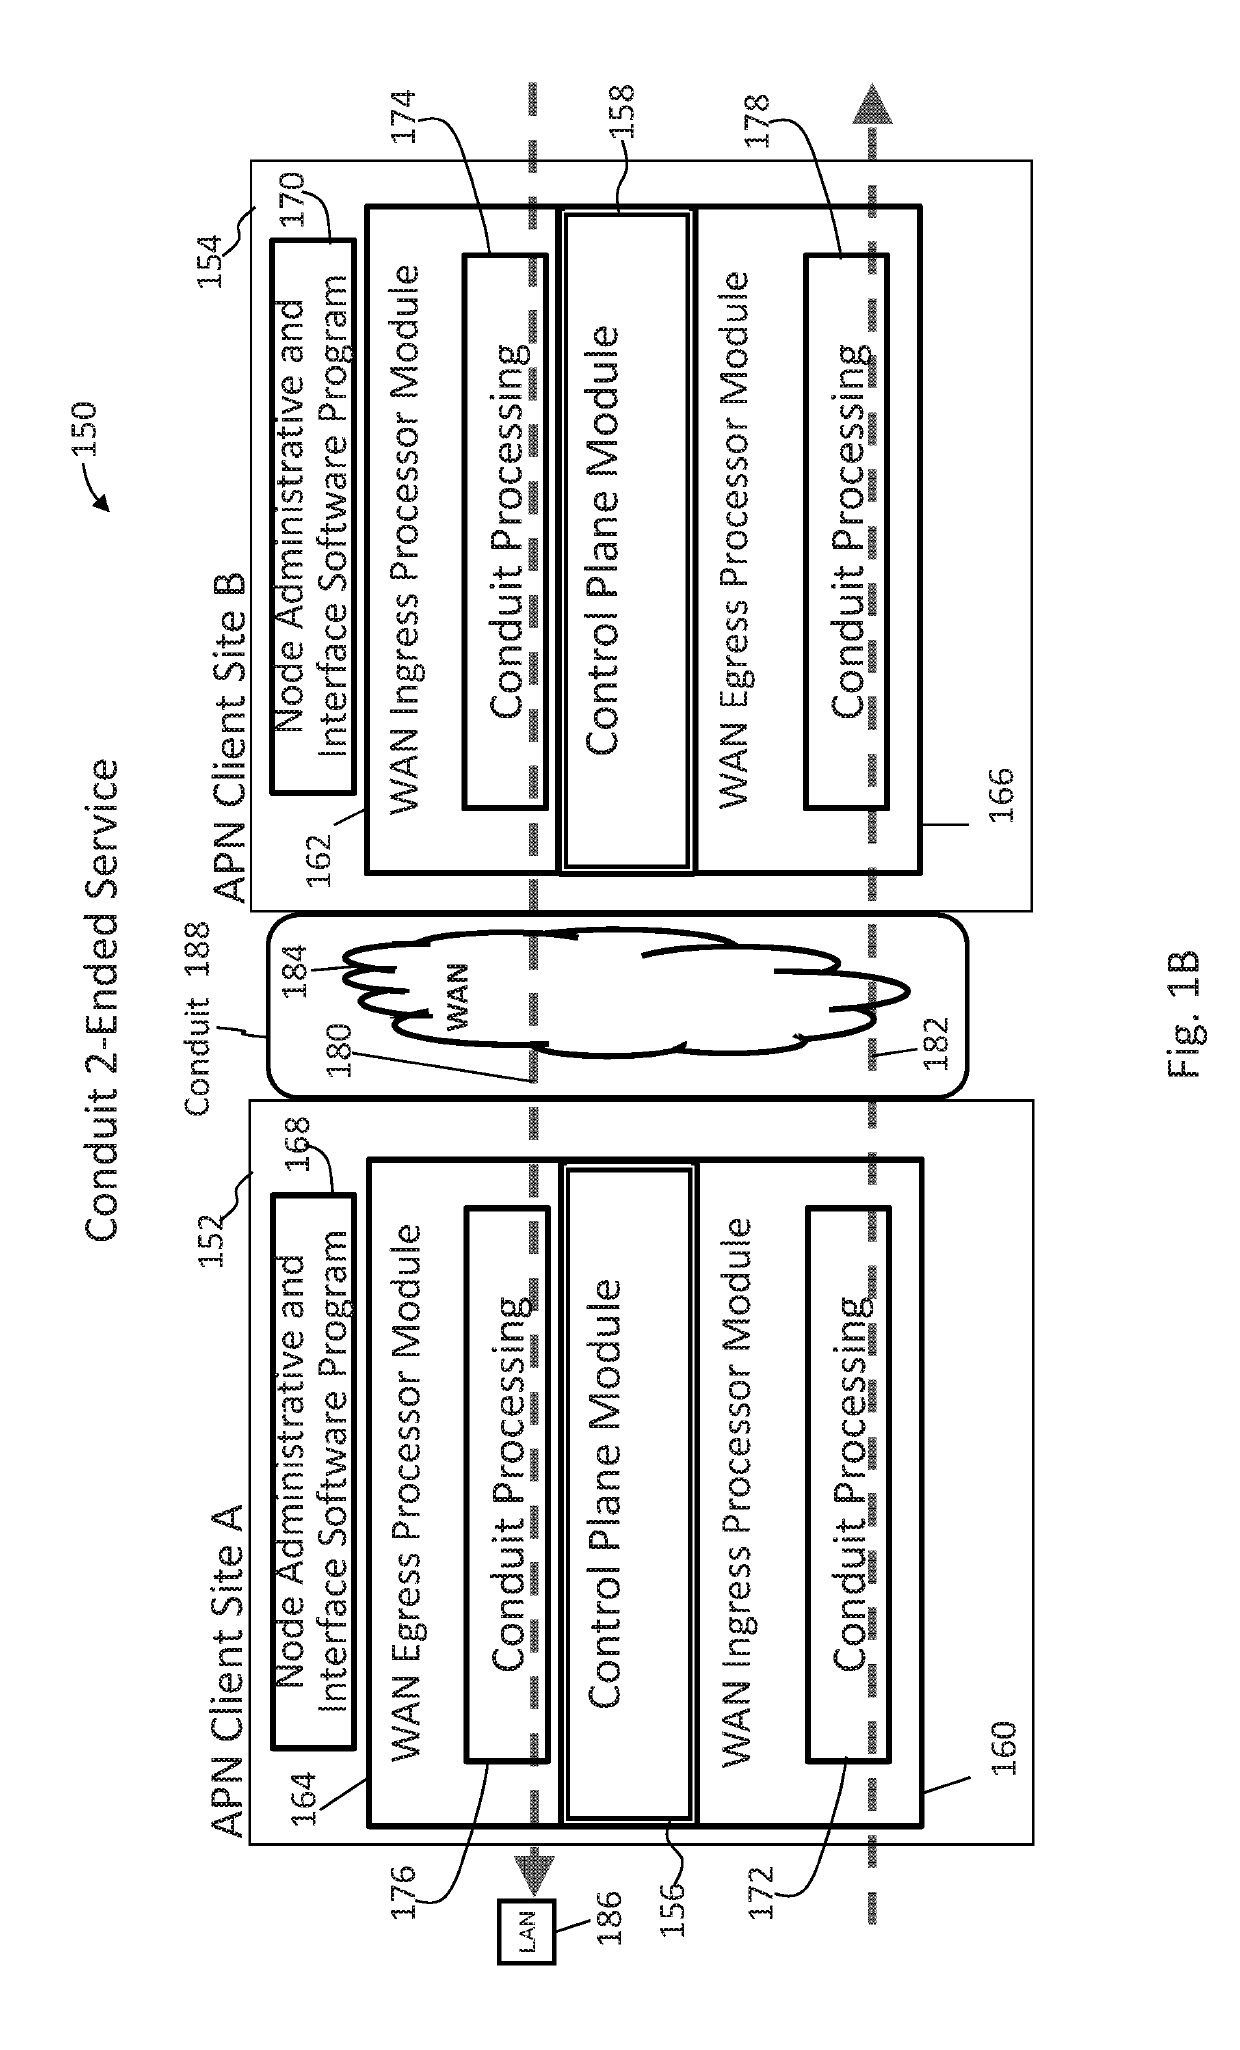 Methods and apparatus for providing adaptive private network centralized management system time correlated playback of network traffic